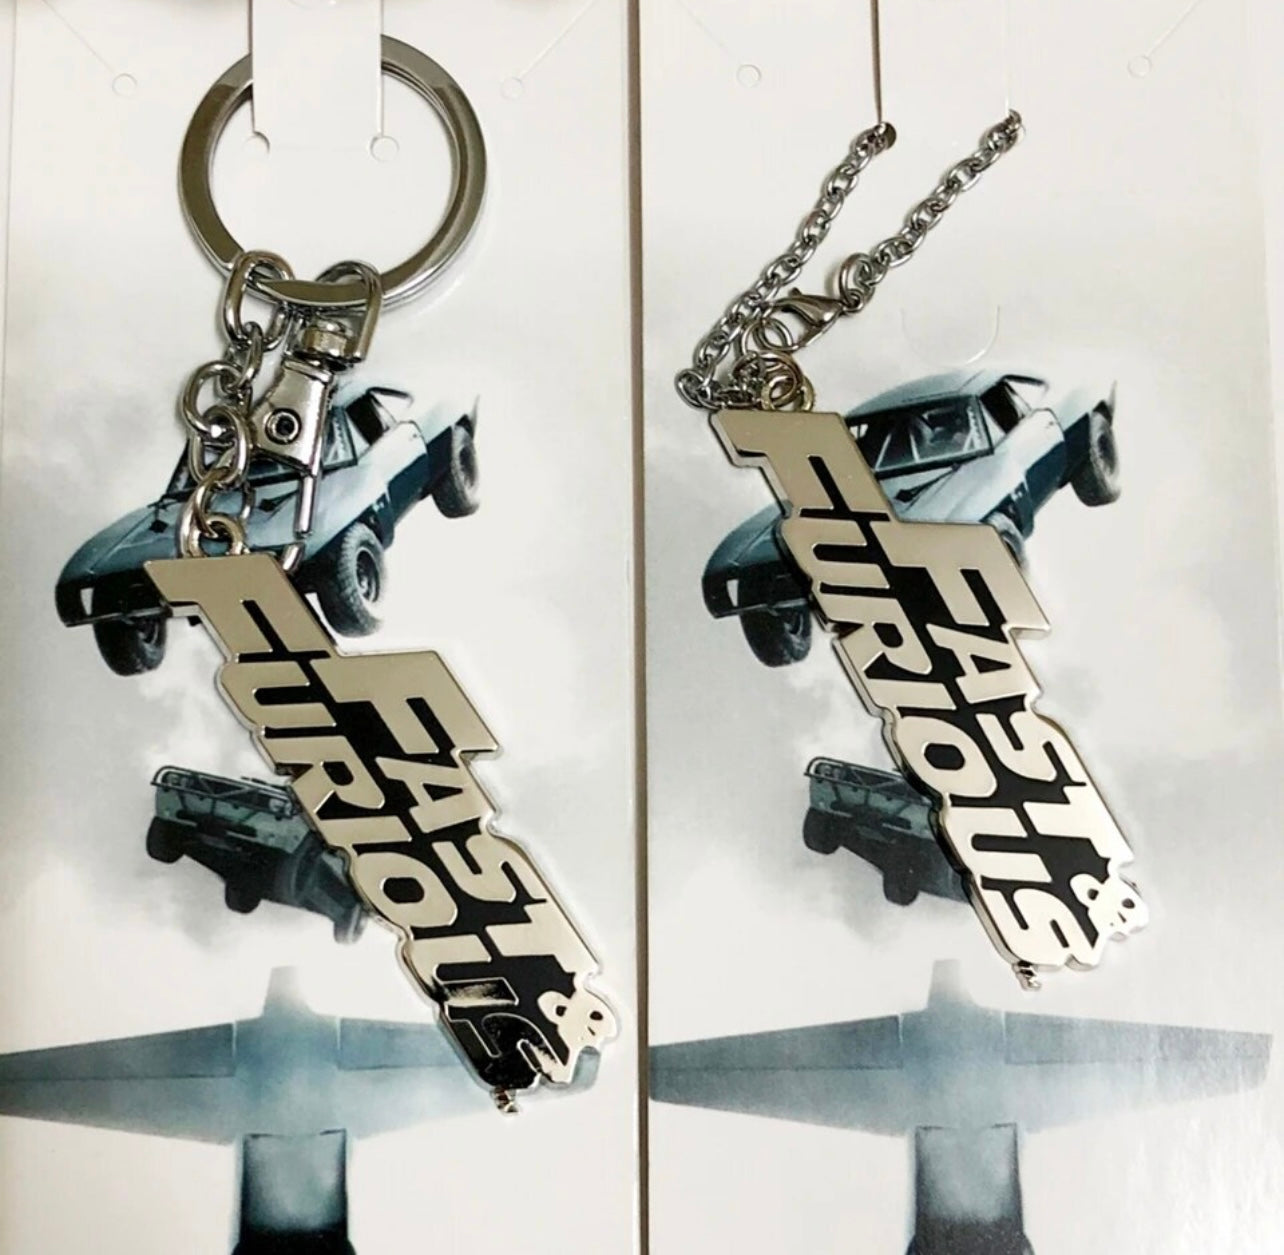 Fast and Furious Key Ring